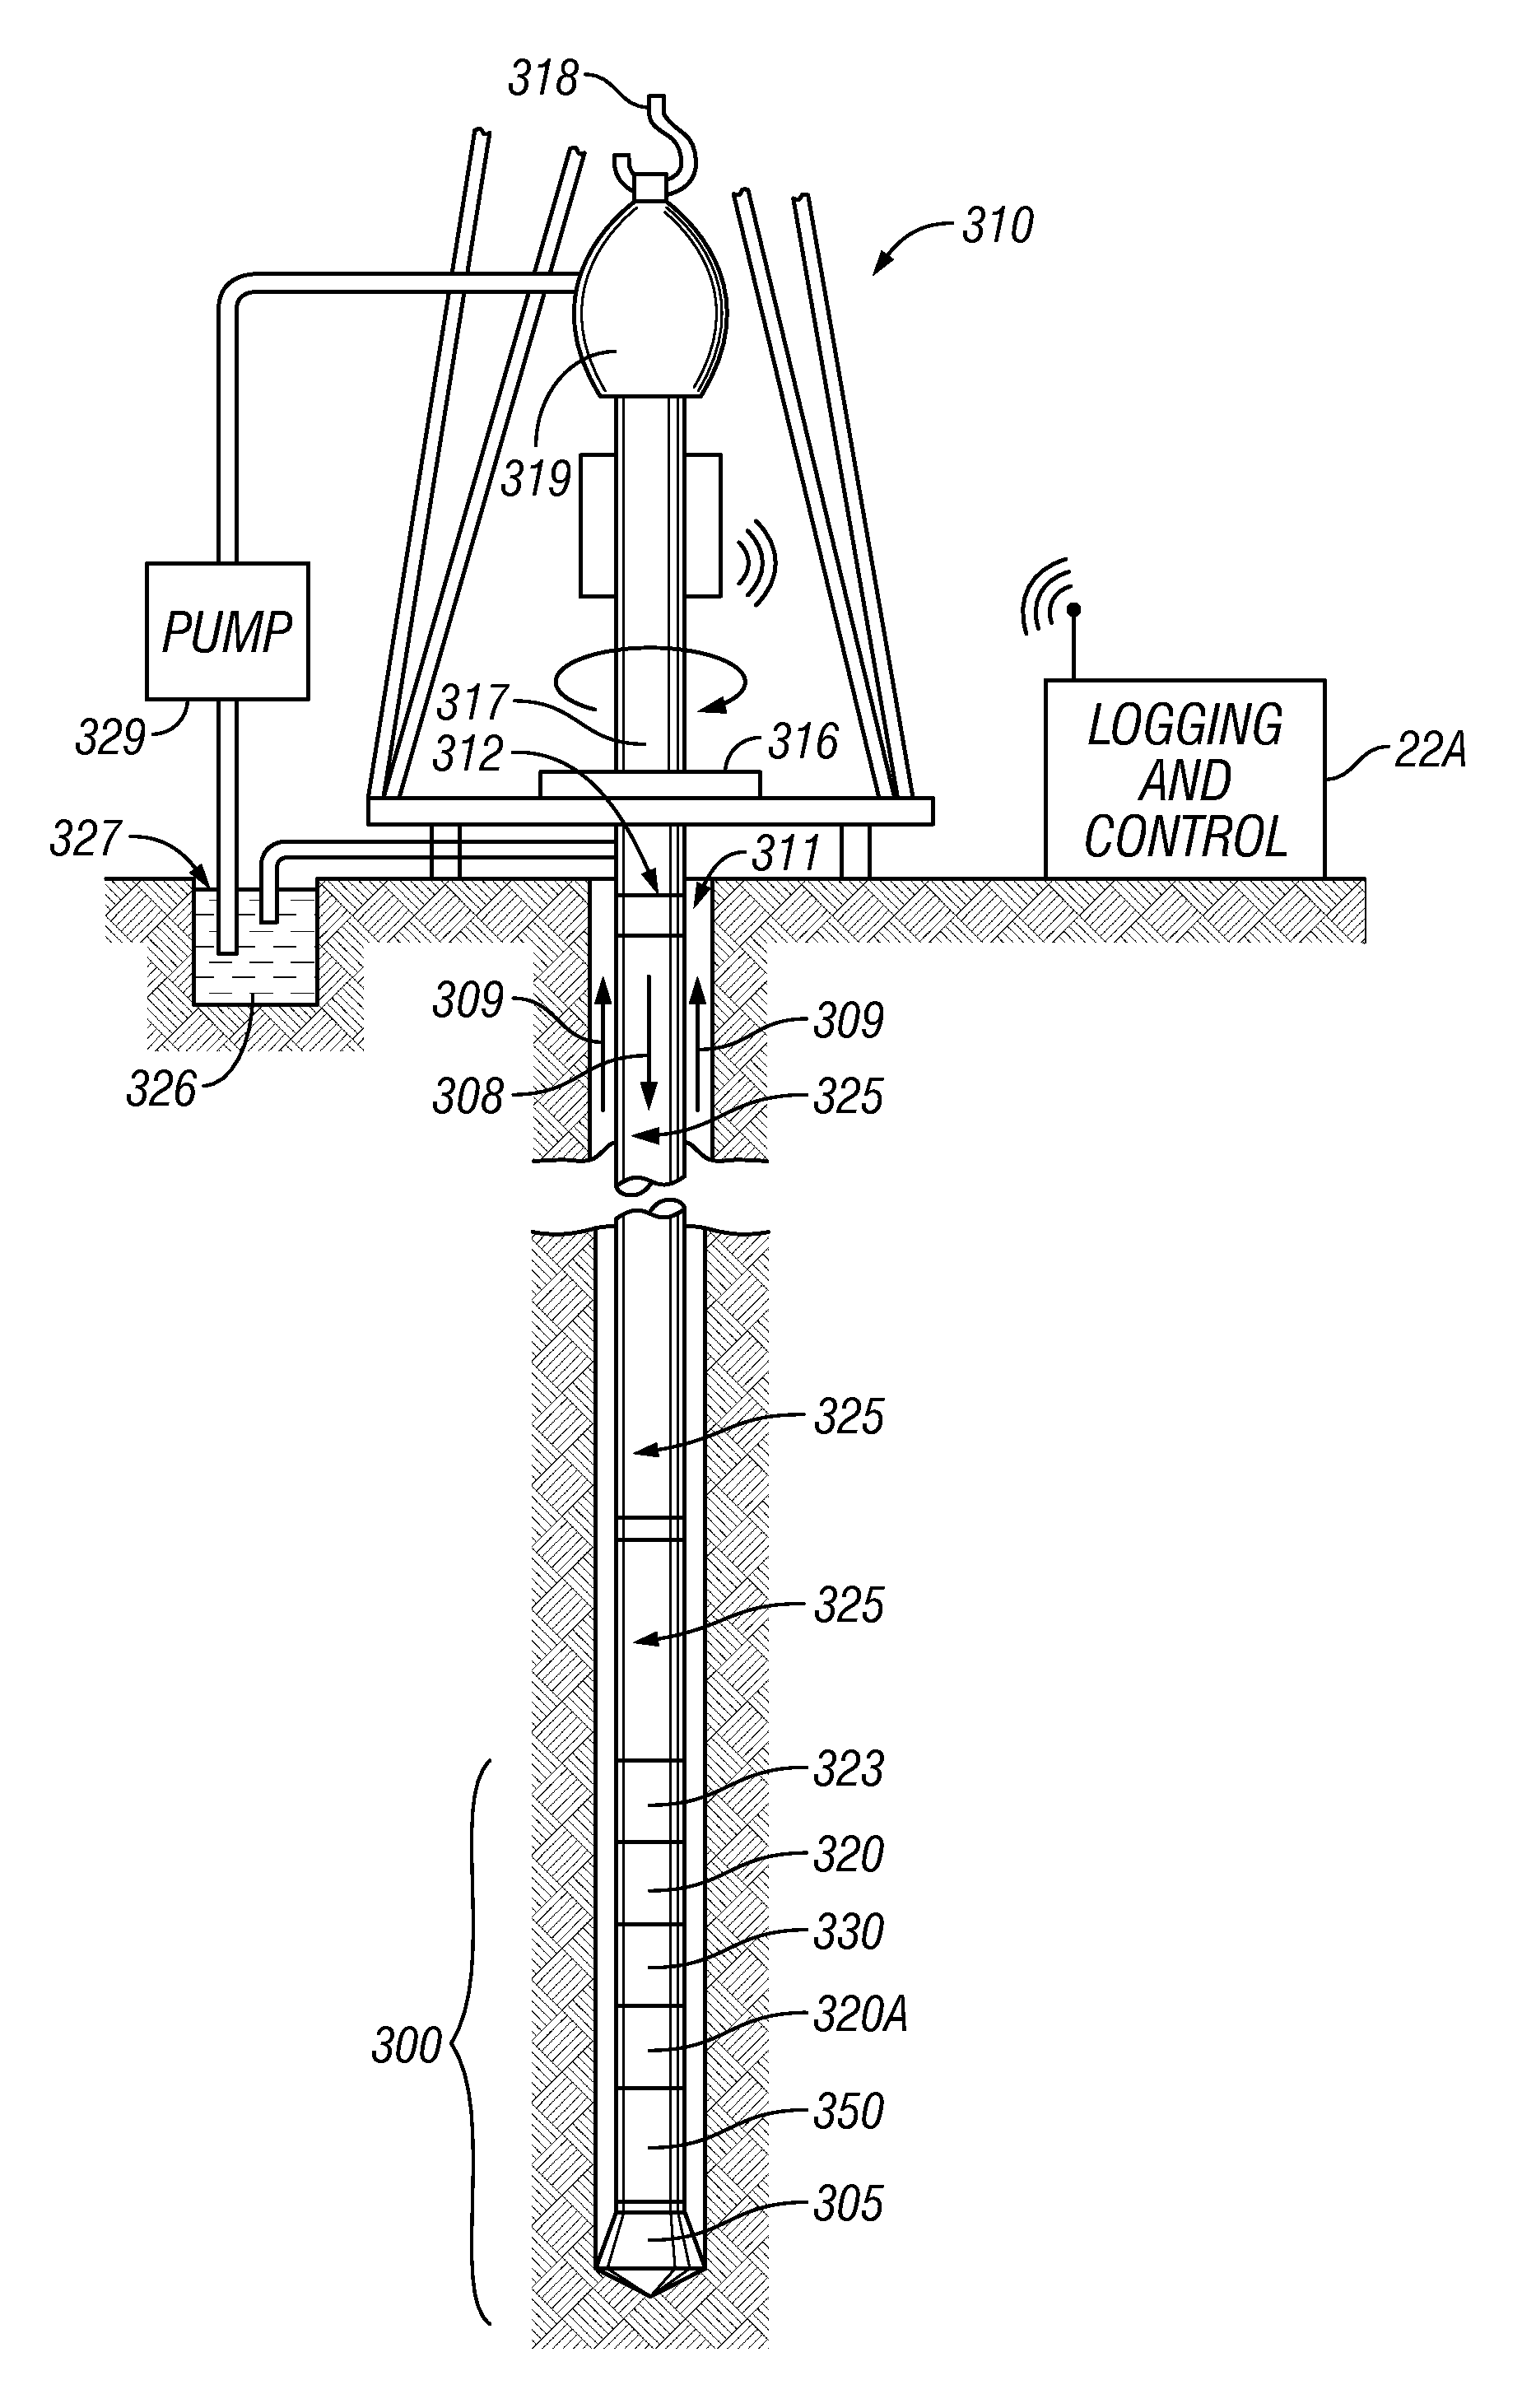 Methods for determining well log attributes for formation characterization